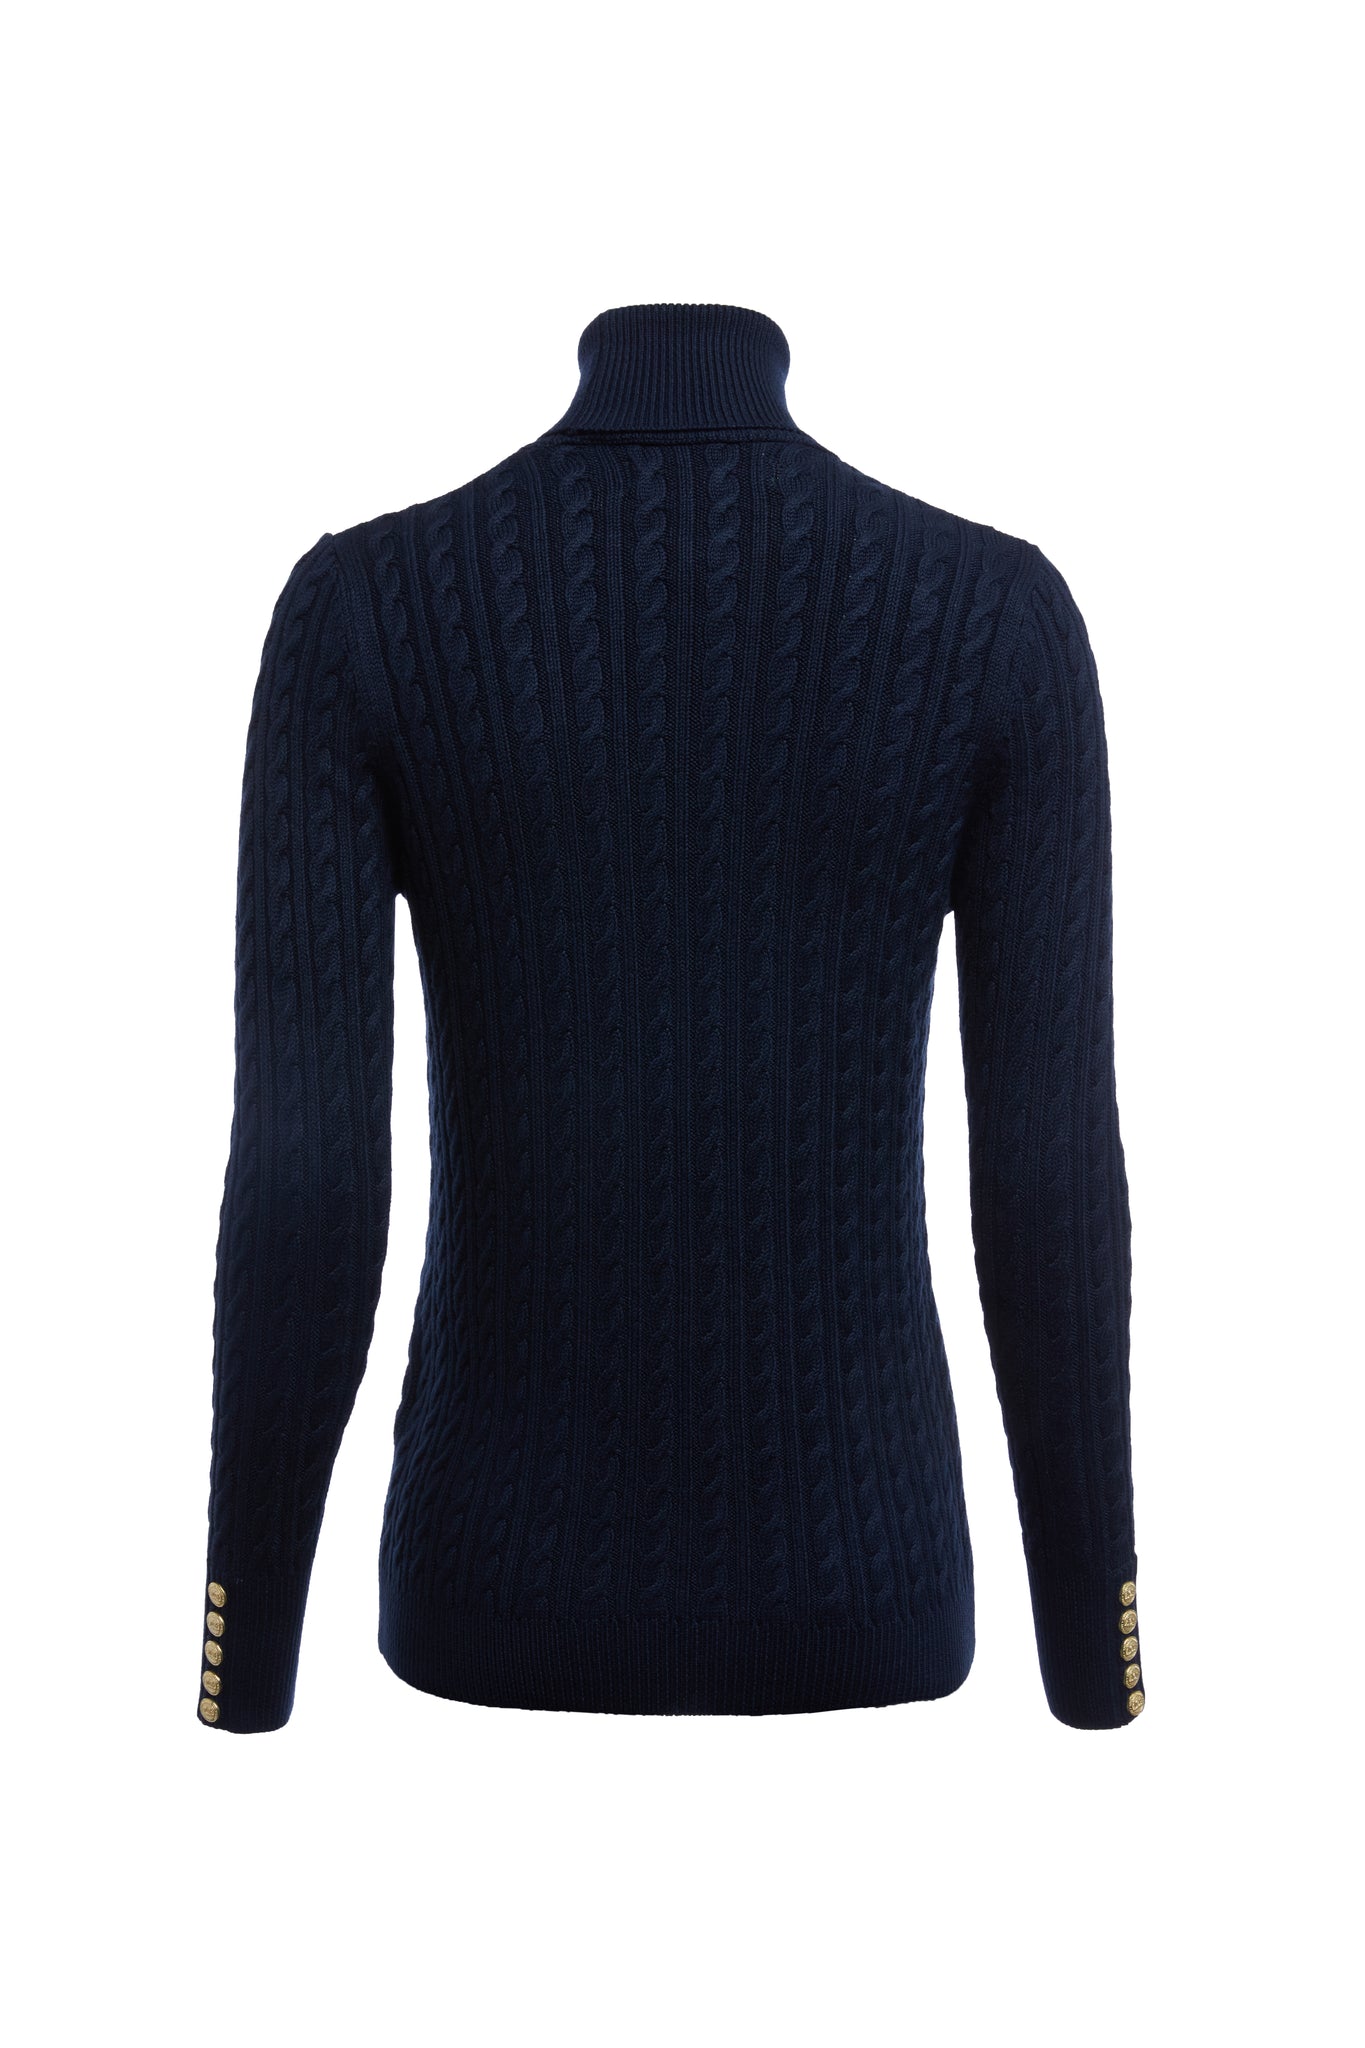 back of womens cable knit jumper in navy with ribbed roll neck cuffs and hem